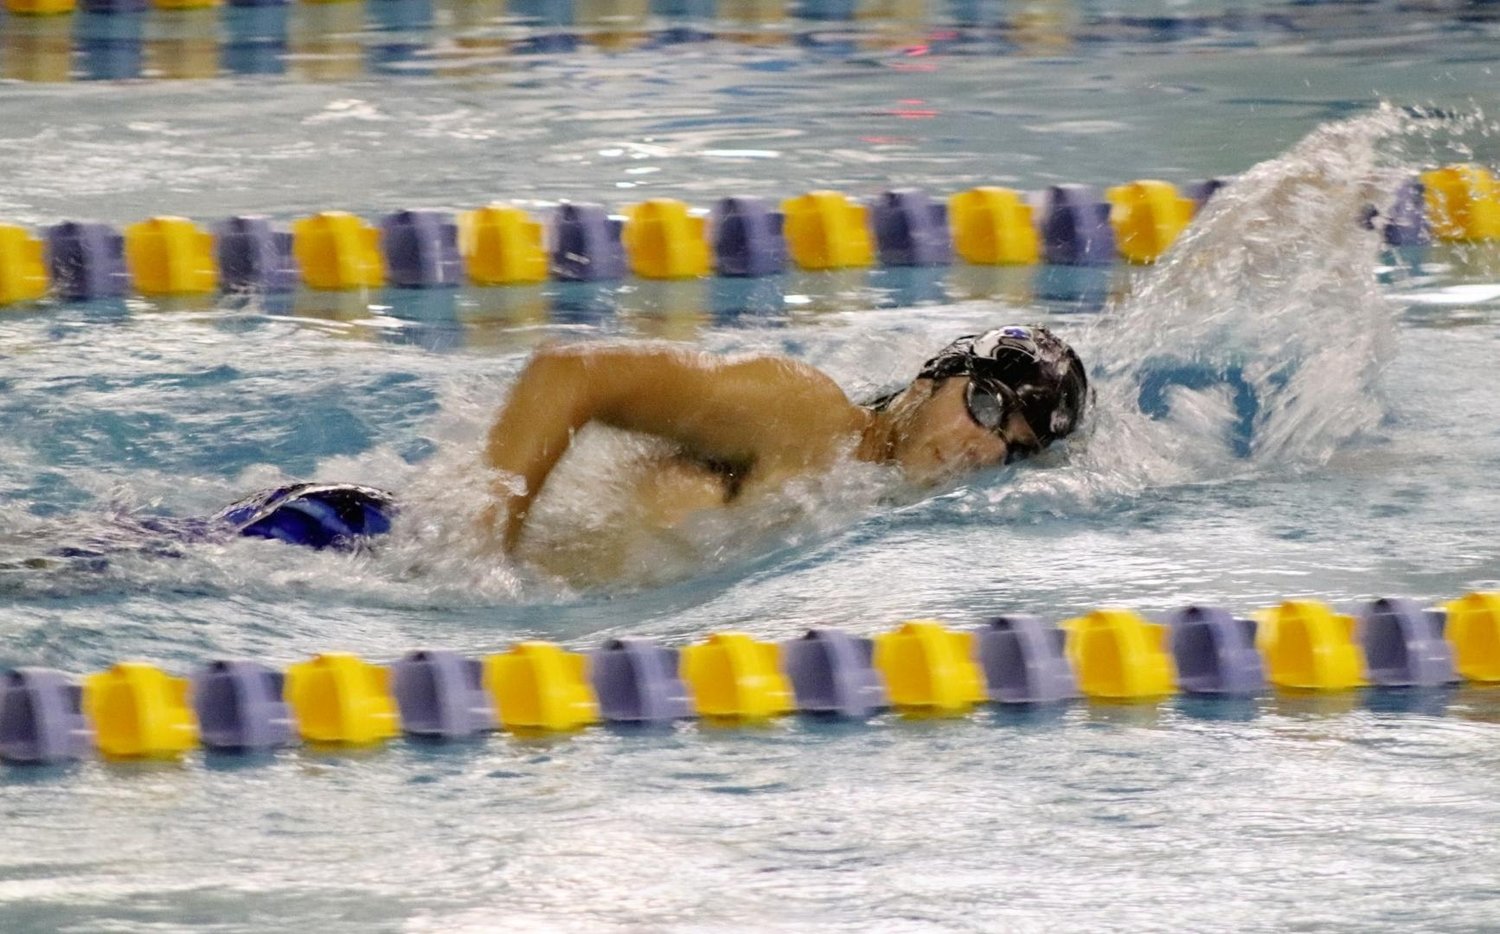 Senior Preston Dotson had two personal records and placed 3rd in the 100 butterfly and 3rd in the 50 Freestyle at the meet on Thursday September 15.